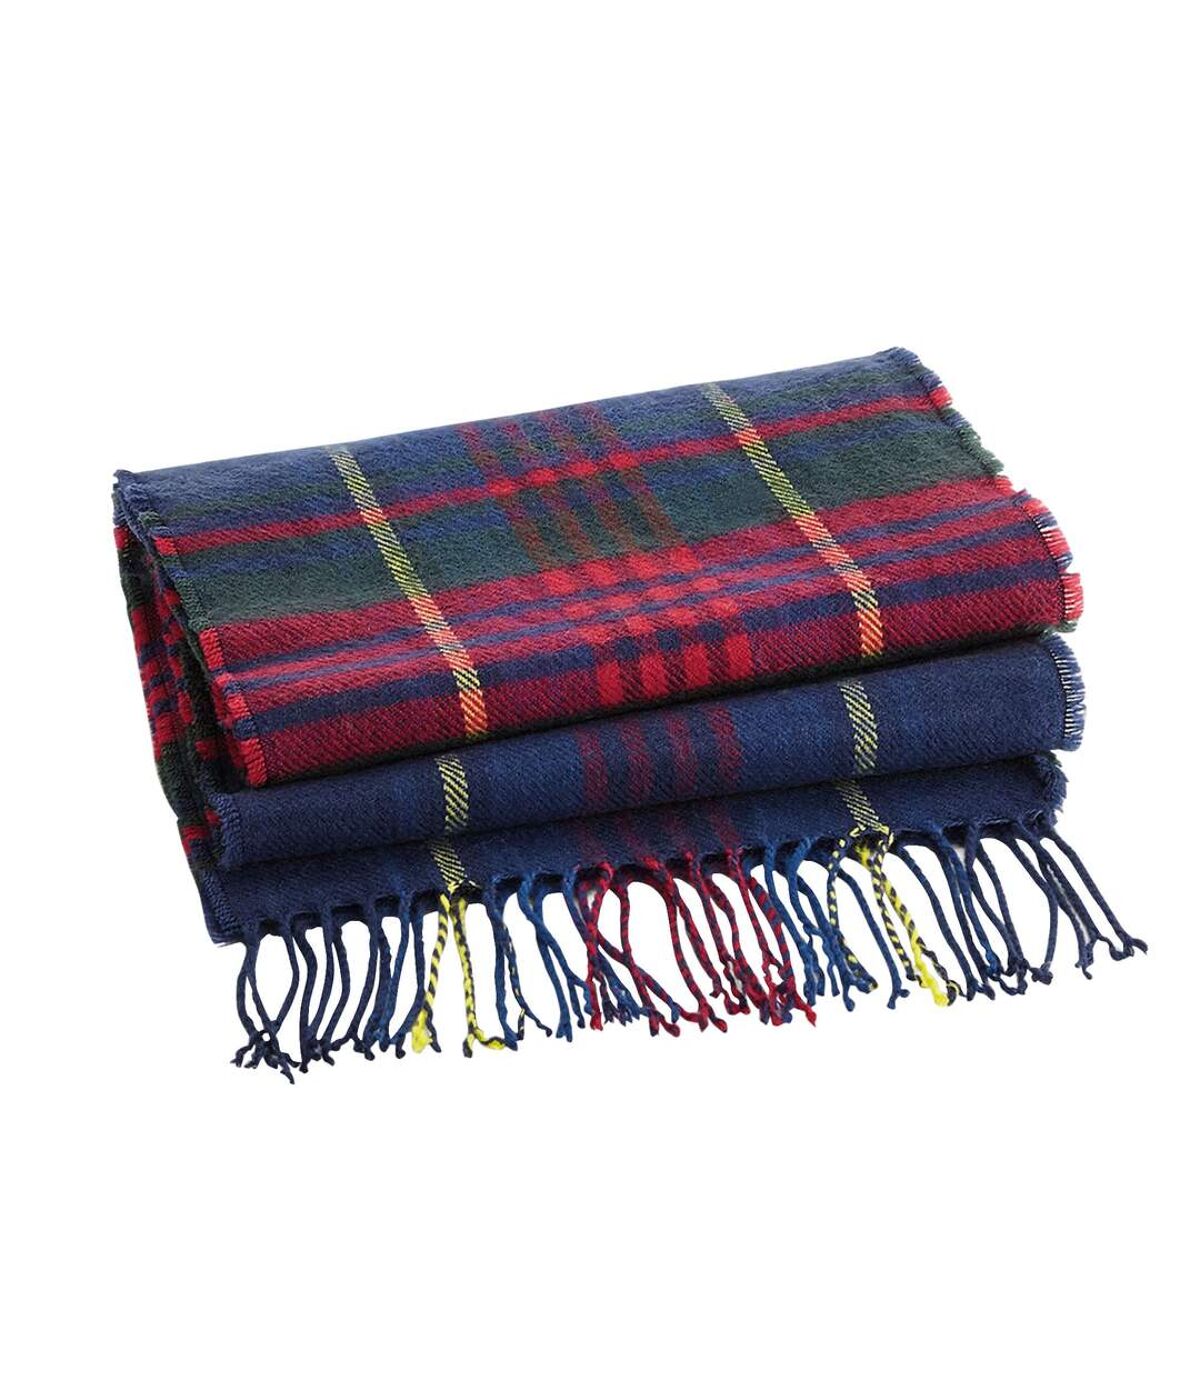 Beechfield Unisex Classic Check Scarf (Blue Check) (One Size) - UTBC4150